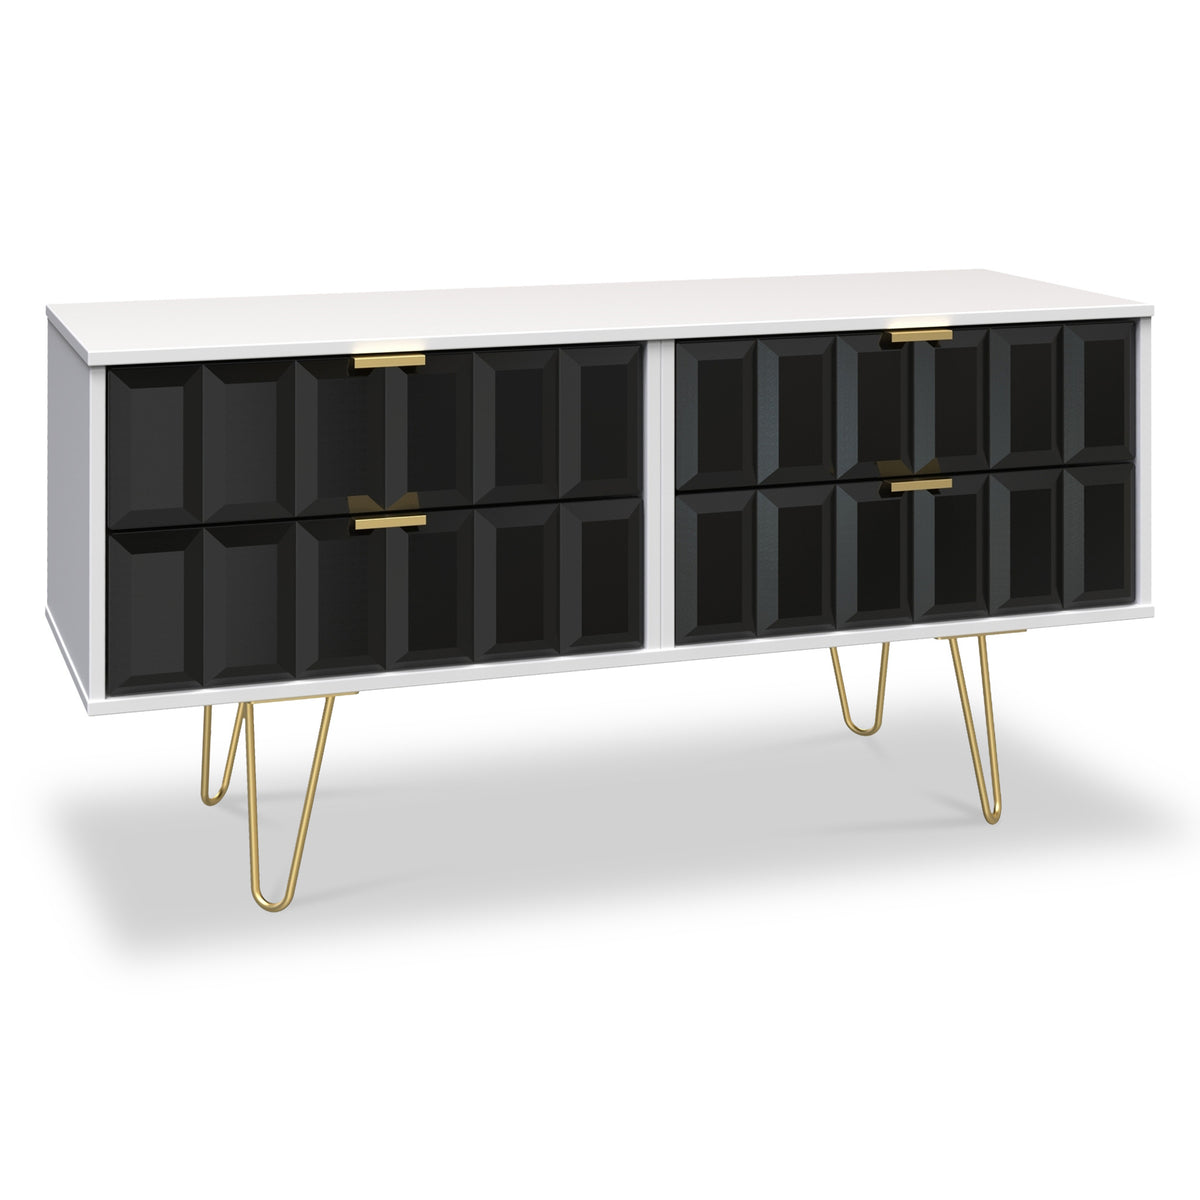 Harlow Black & White 4 Drawer Low TV Unit with Gold Hairpin Legs from Roseland